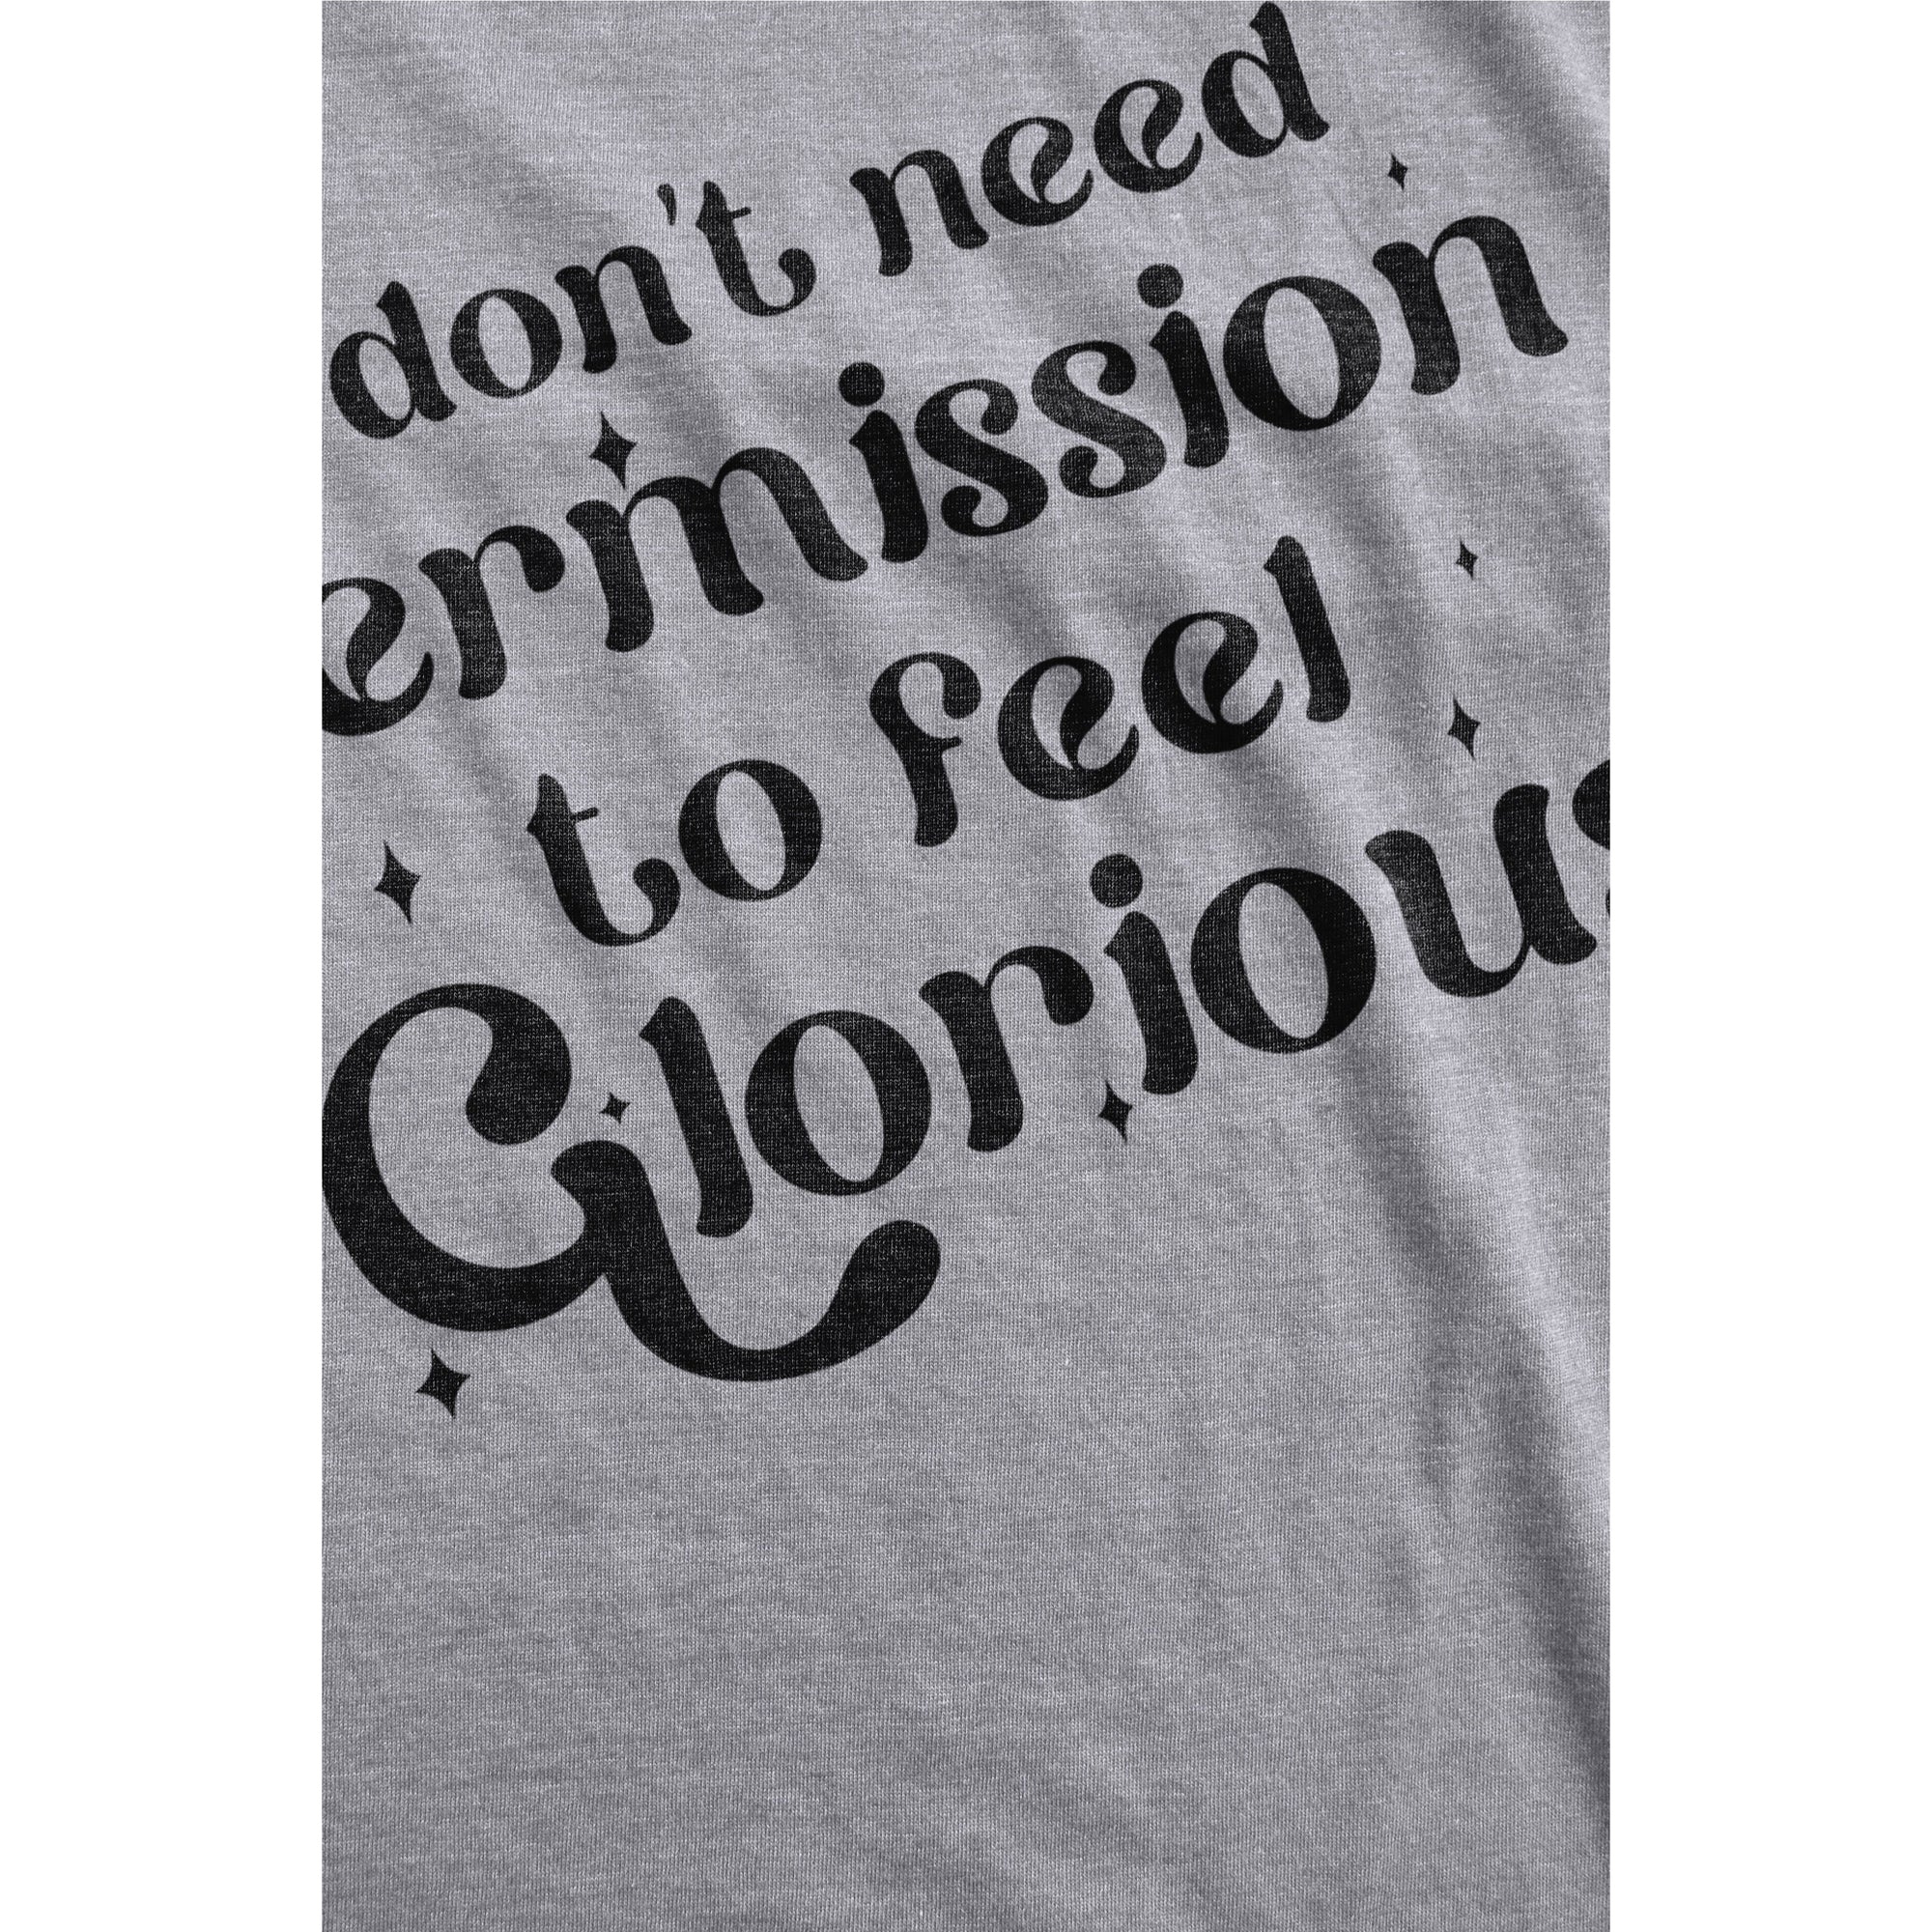 I Don't Need Permission To Feel Glorious - threadtank | stories you can wear